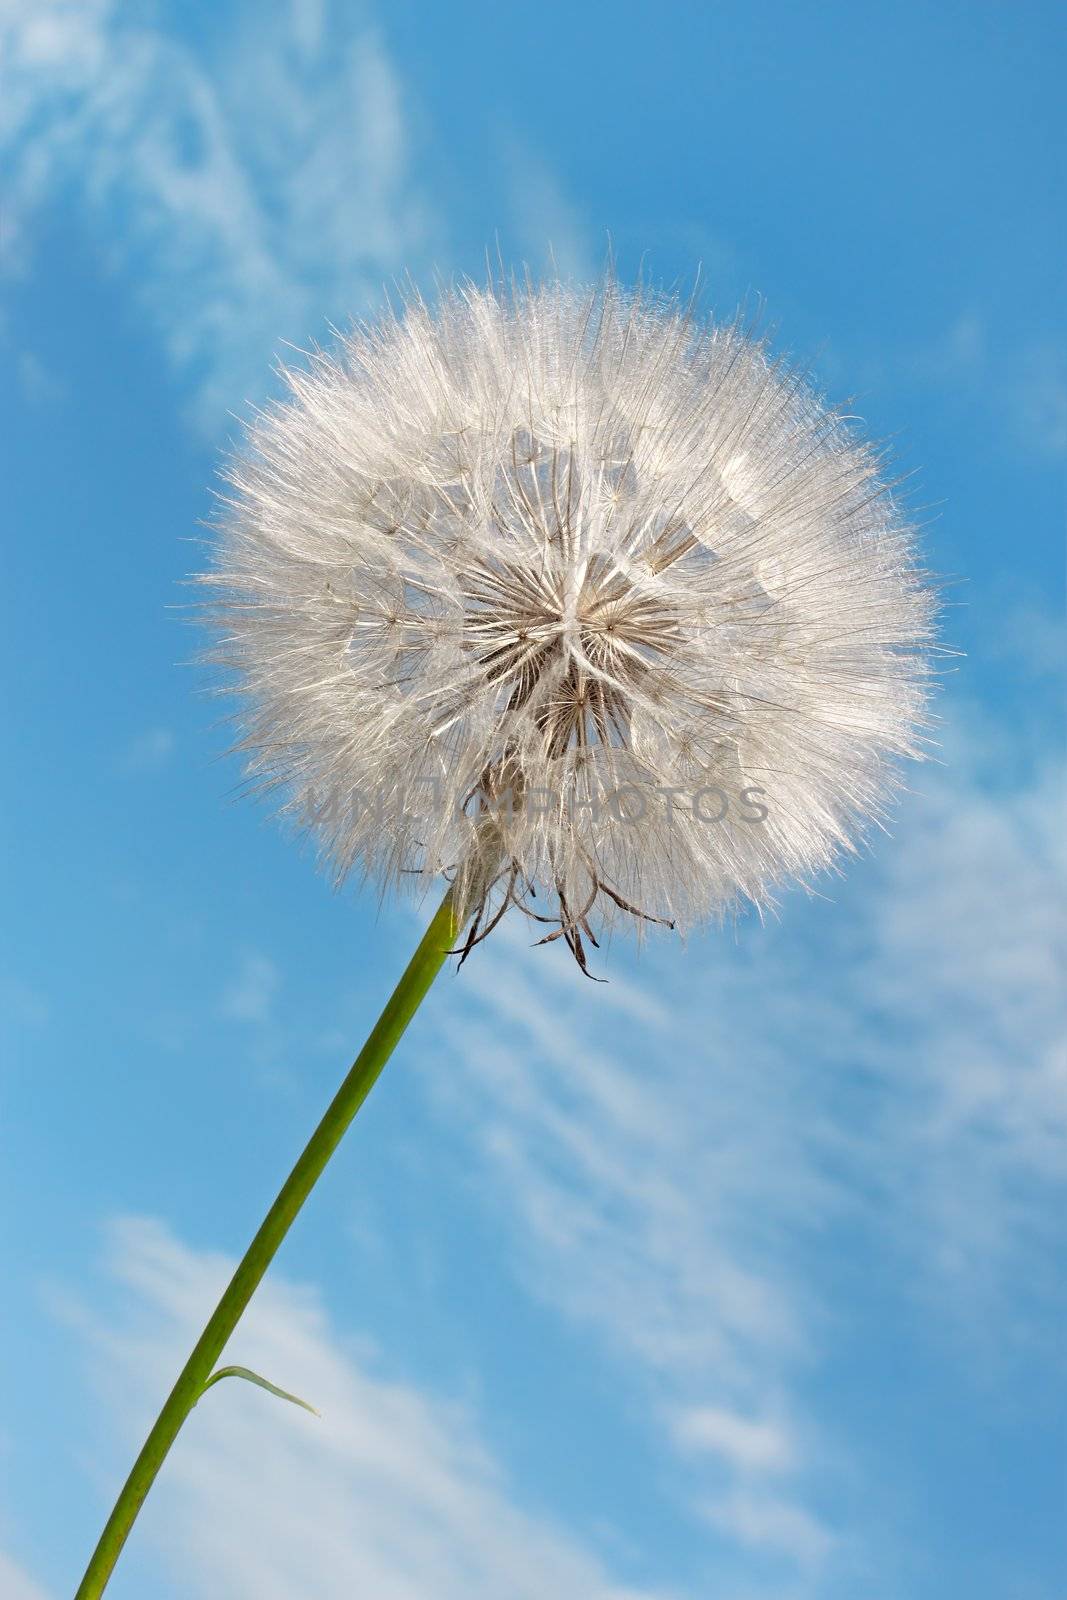 Dandelion against blue sky background with light white clouds